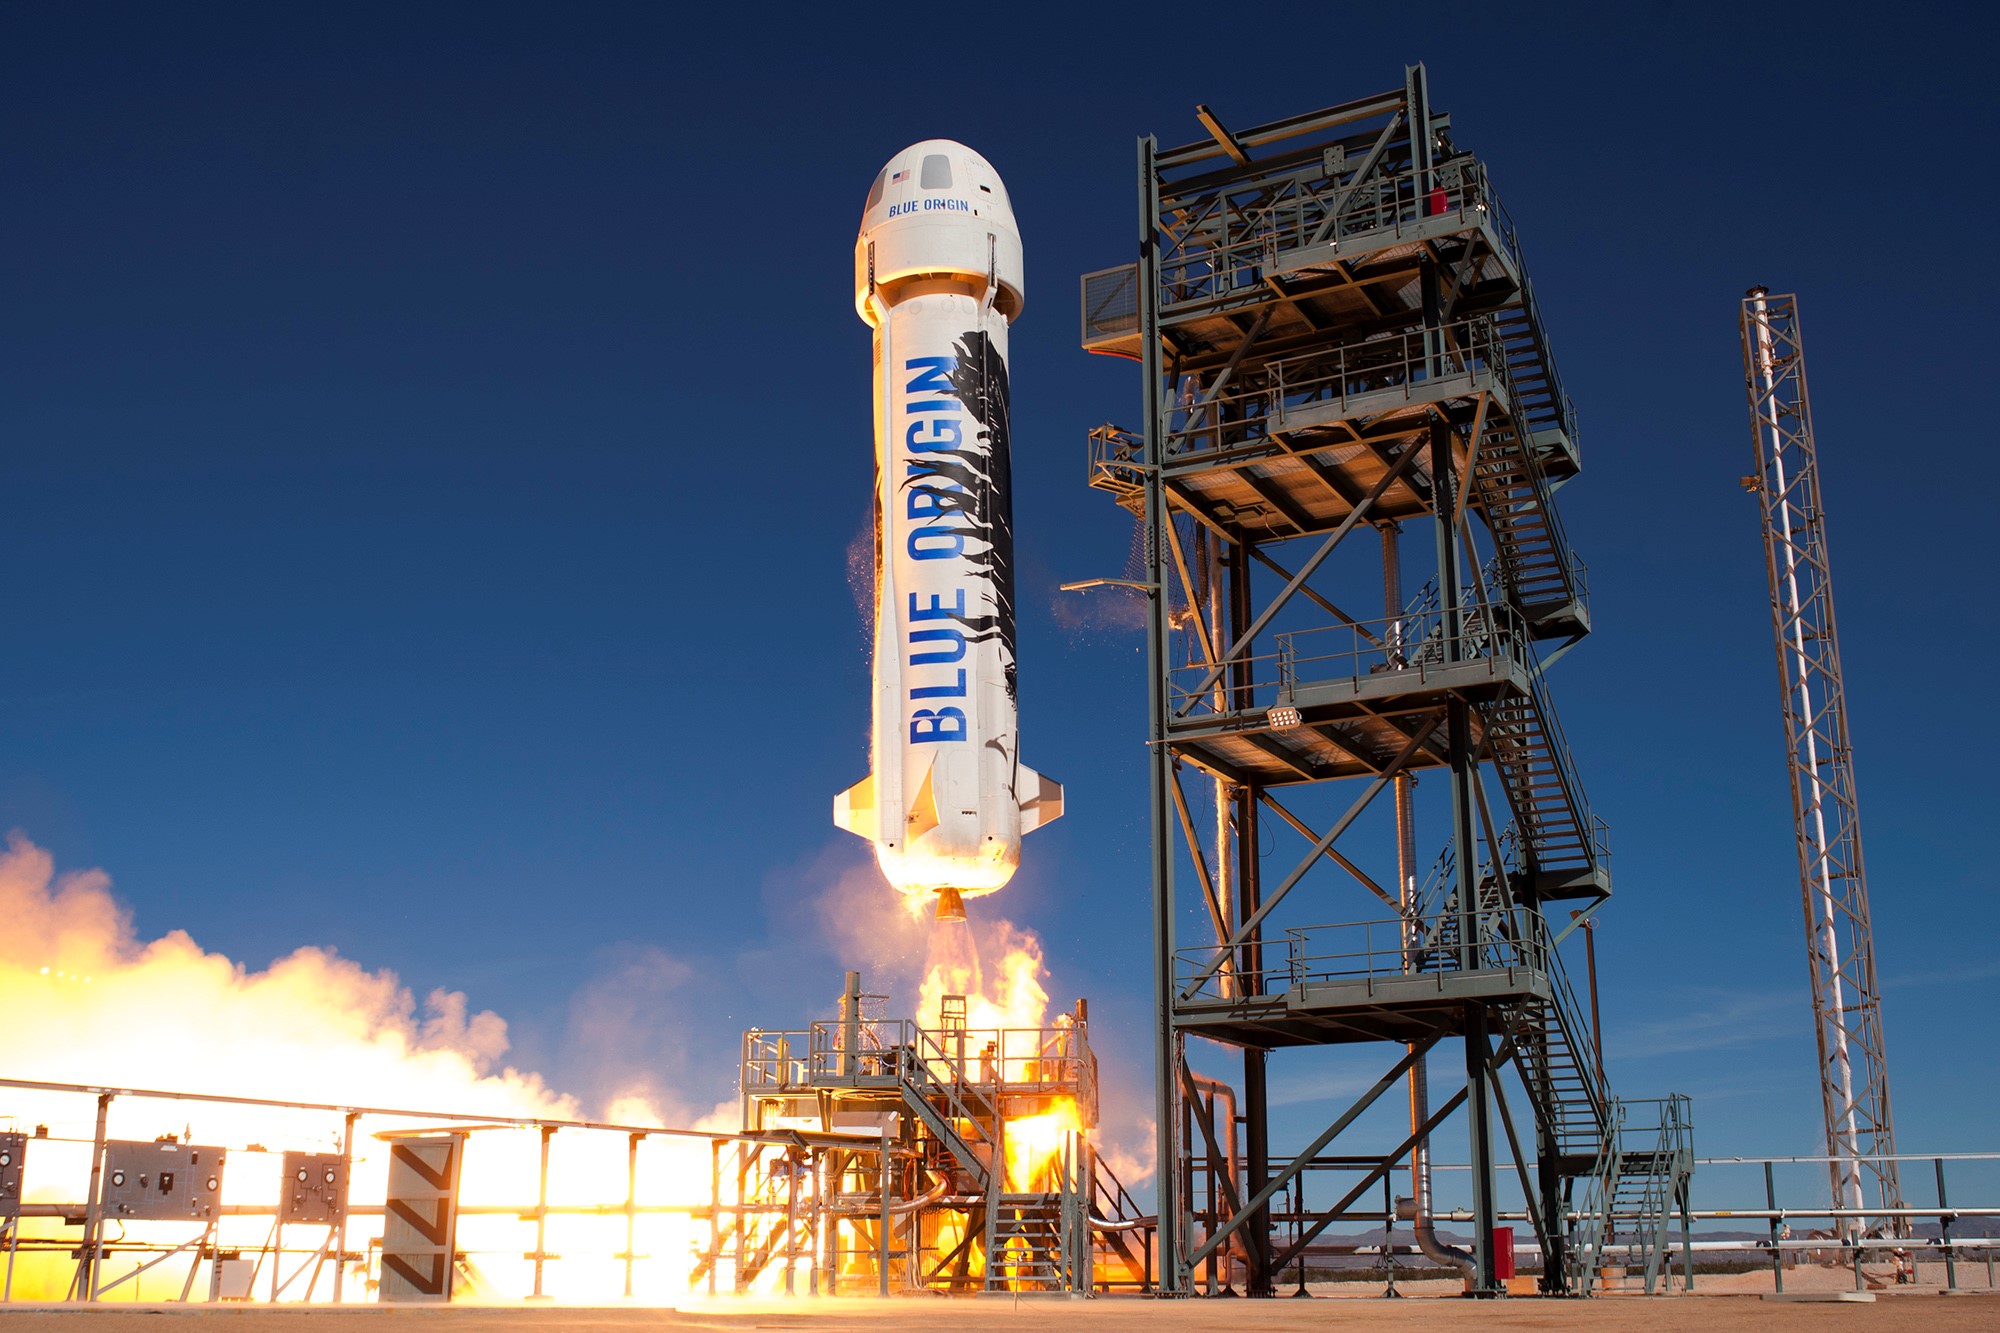 A year after New Shepard’s accident, Blue Origin may return to flight next month